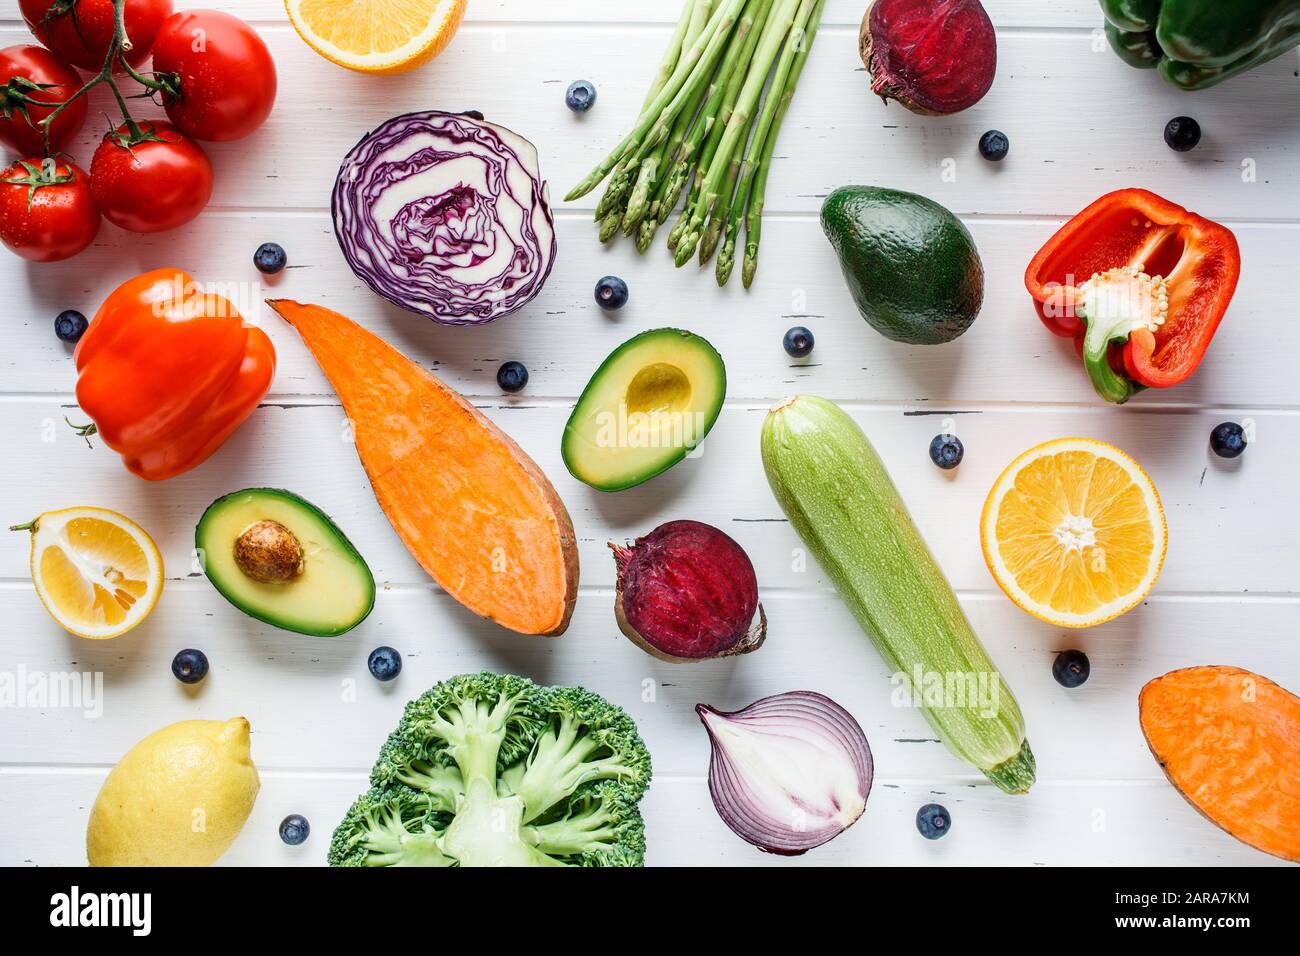 Rainbow colors vegetables and berry background. Detox, vegan food, ingredients for juice and salad. Stock Photo